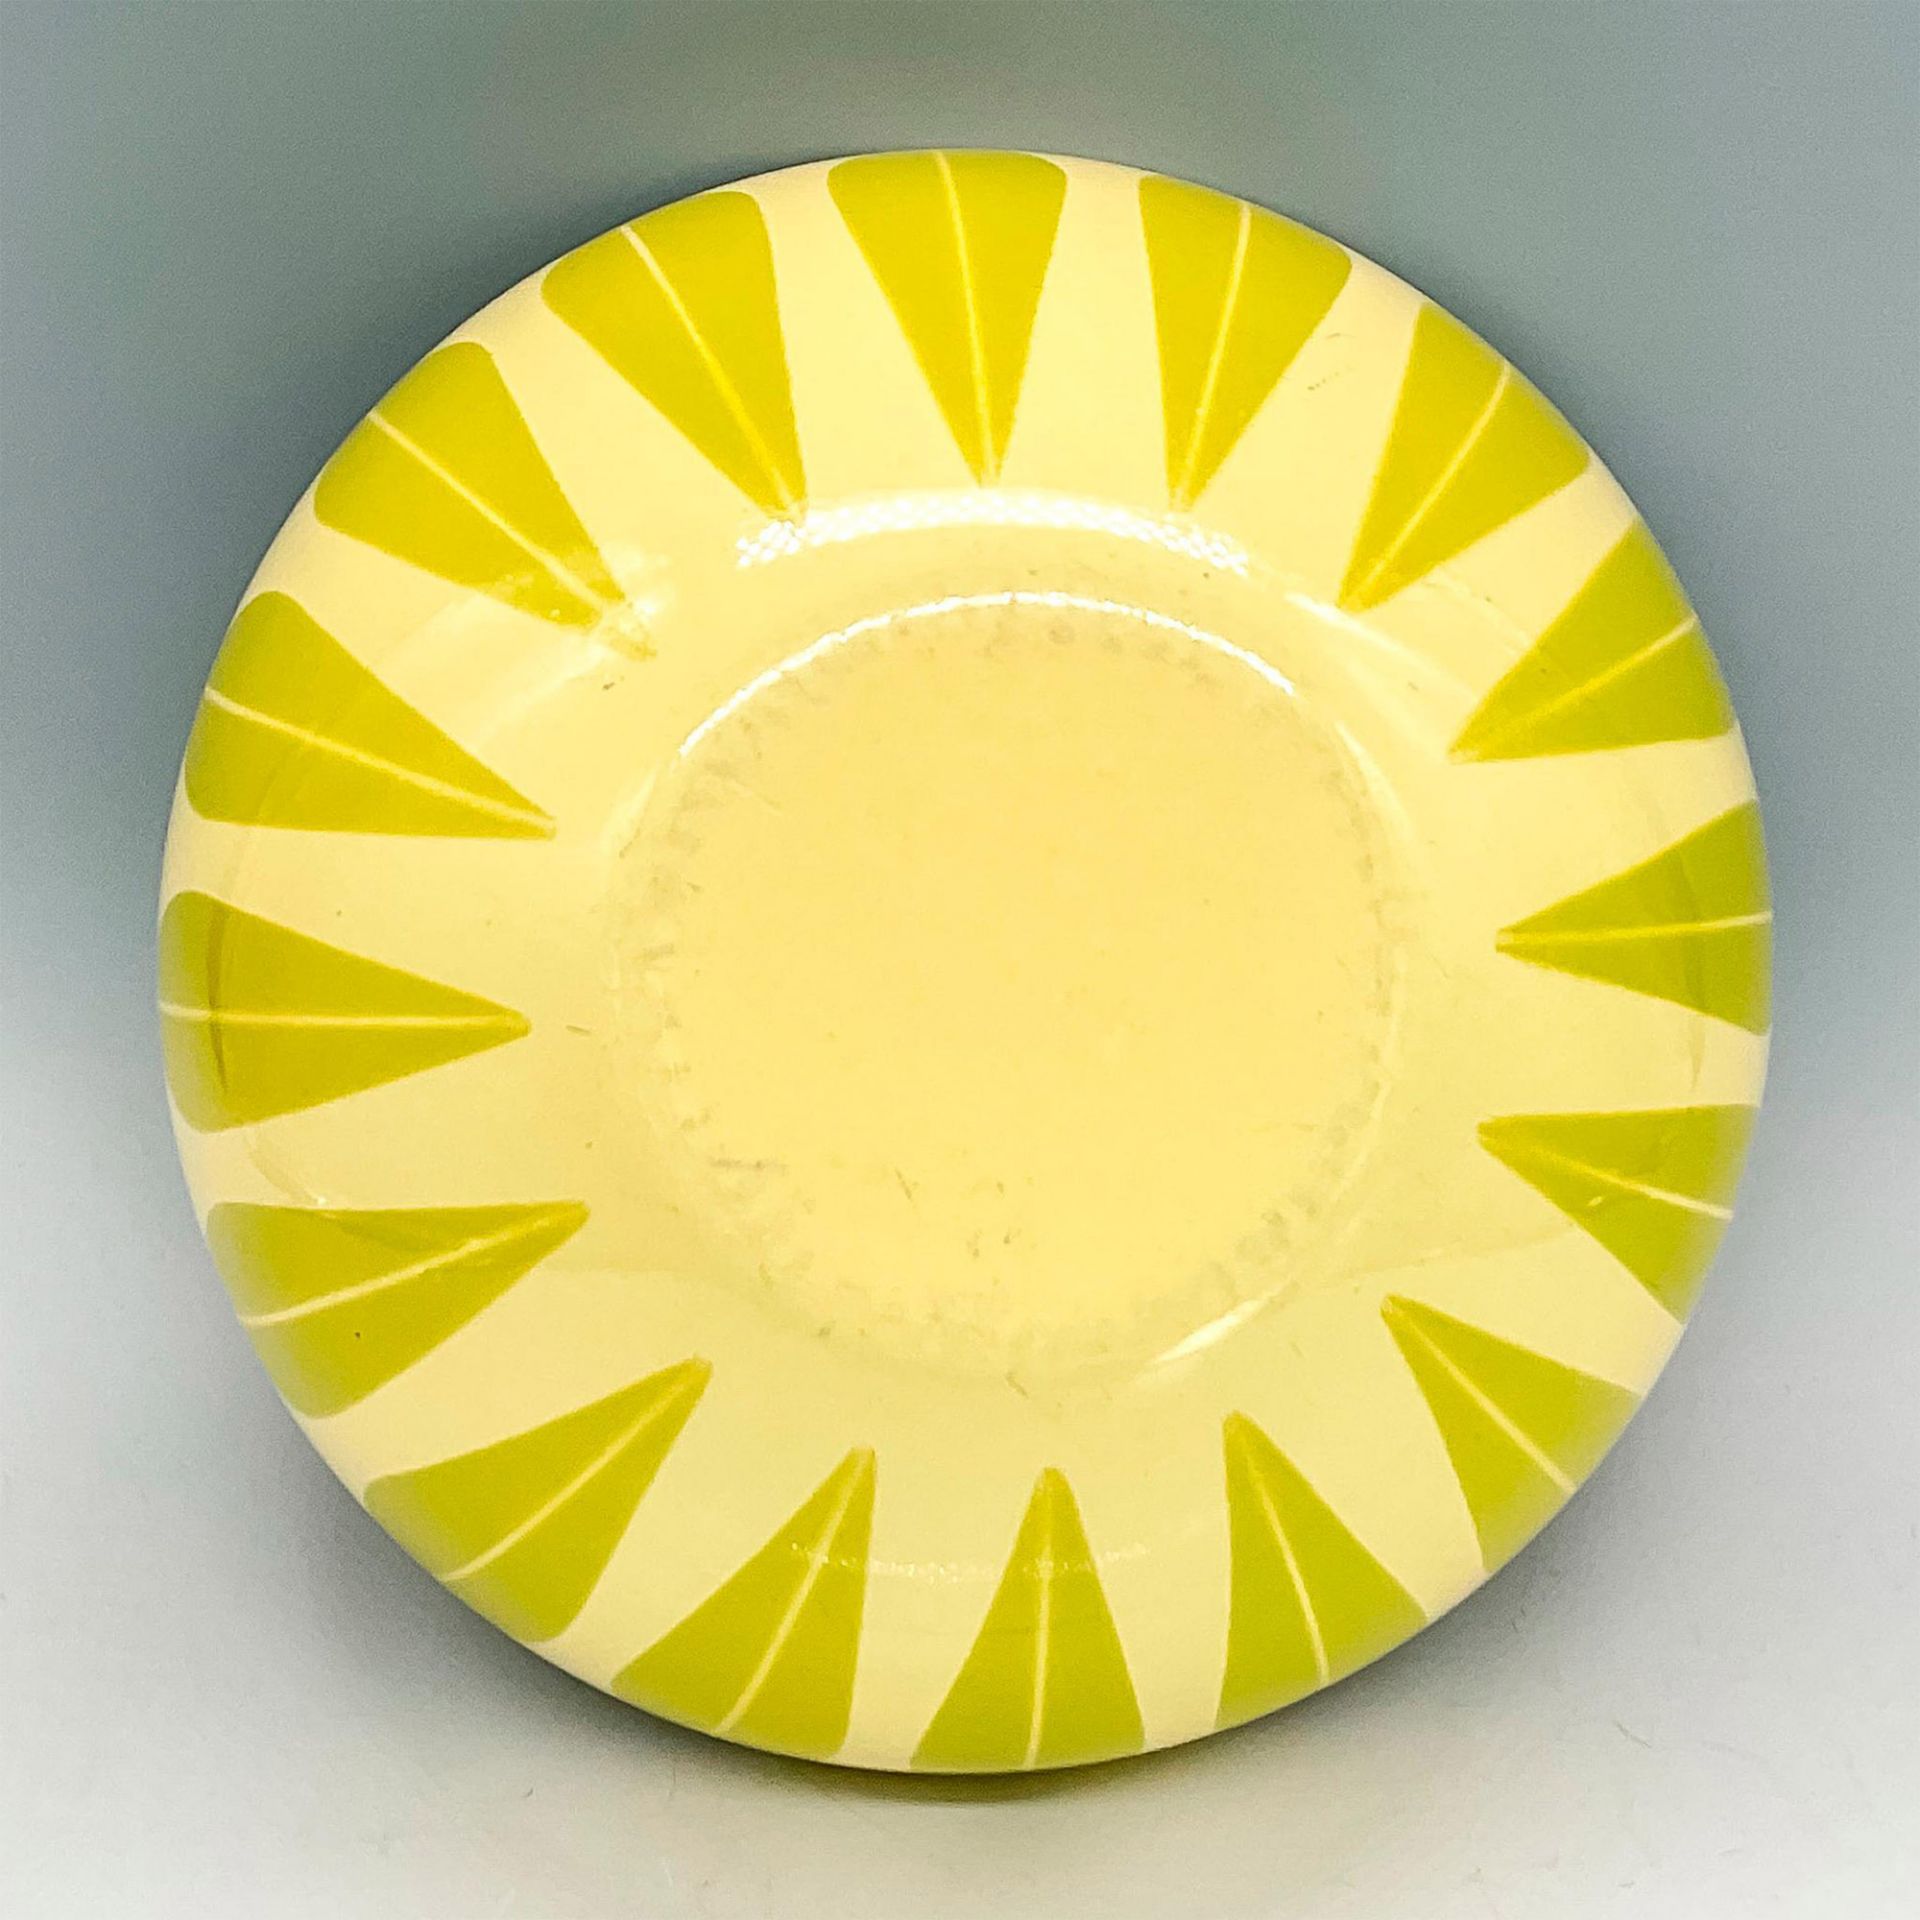 Cathrineholm Enamelware Bowl, Green Leaves on Yellow - Image 3 of 3